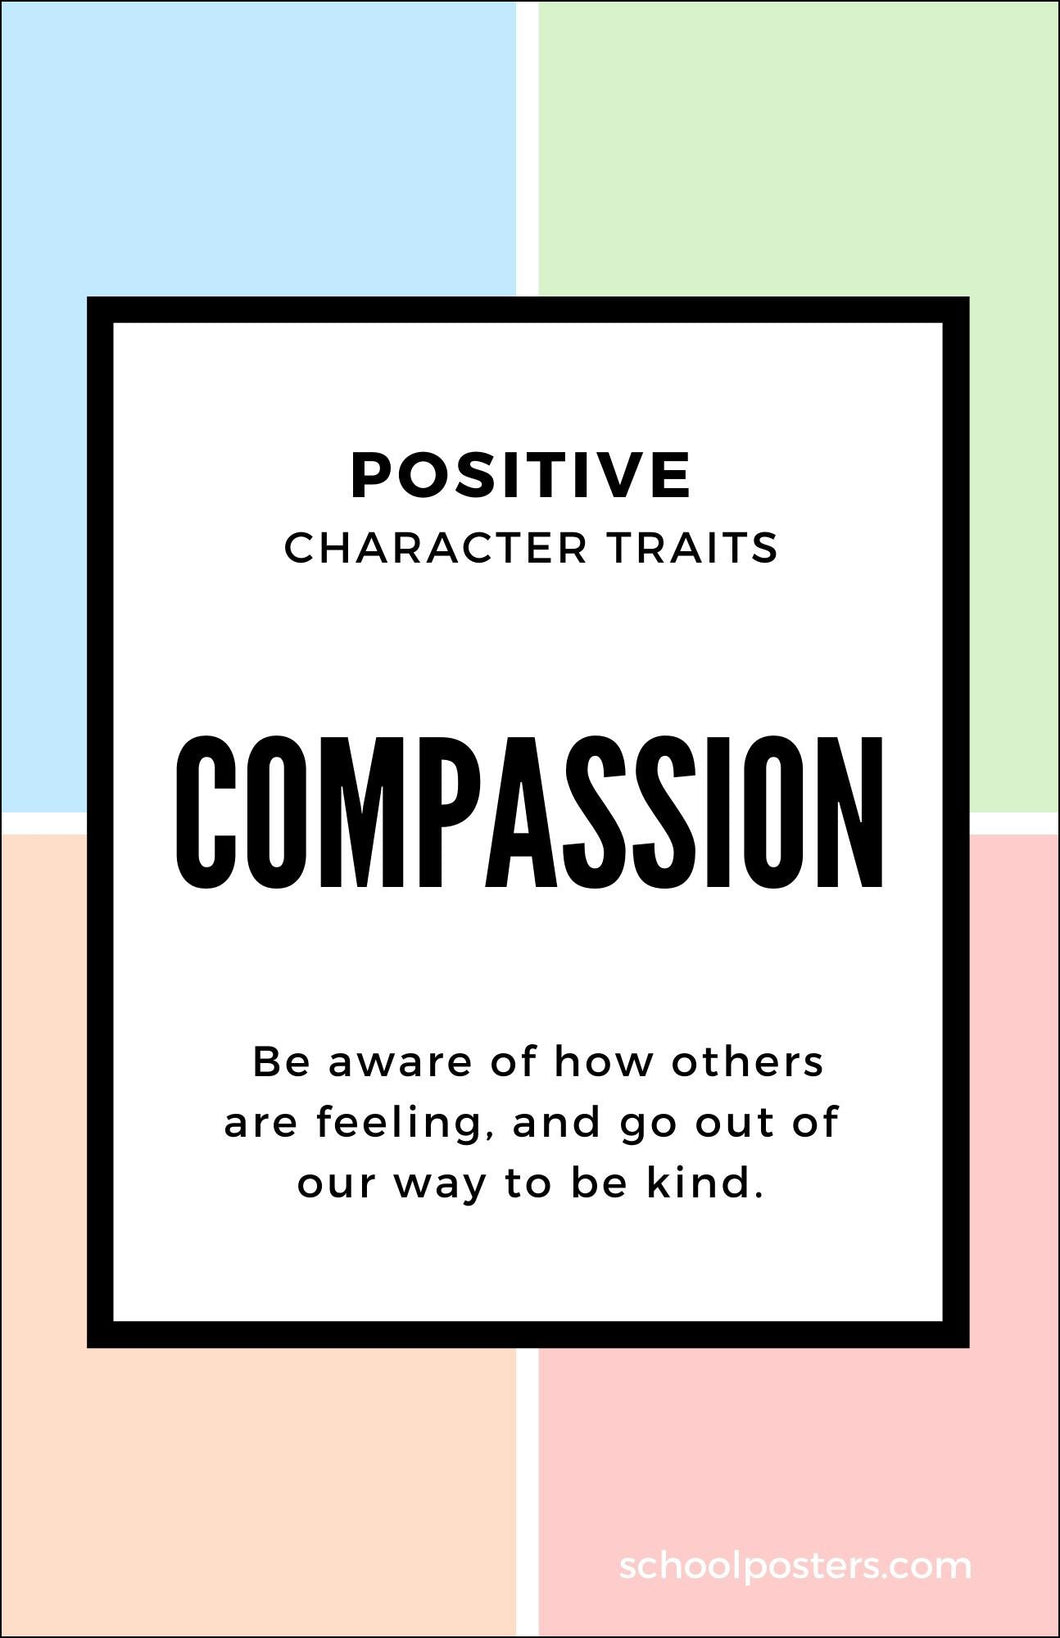 Character Compassion Poster